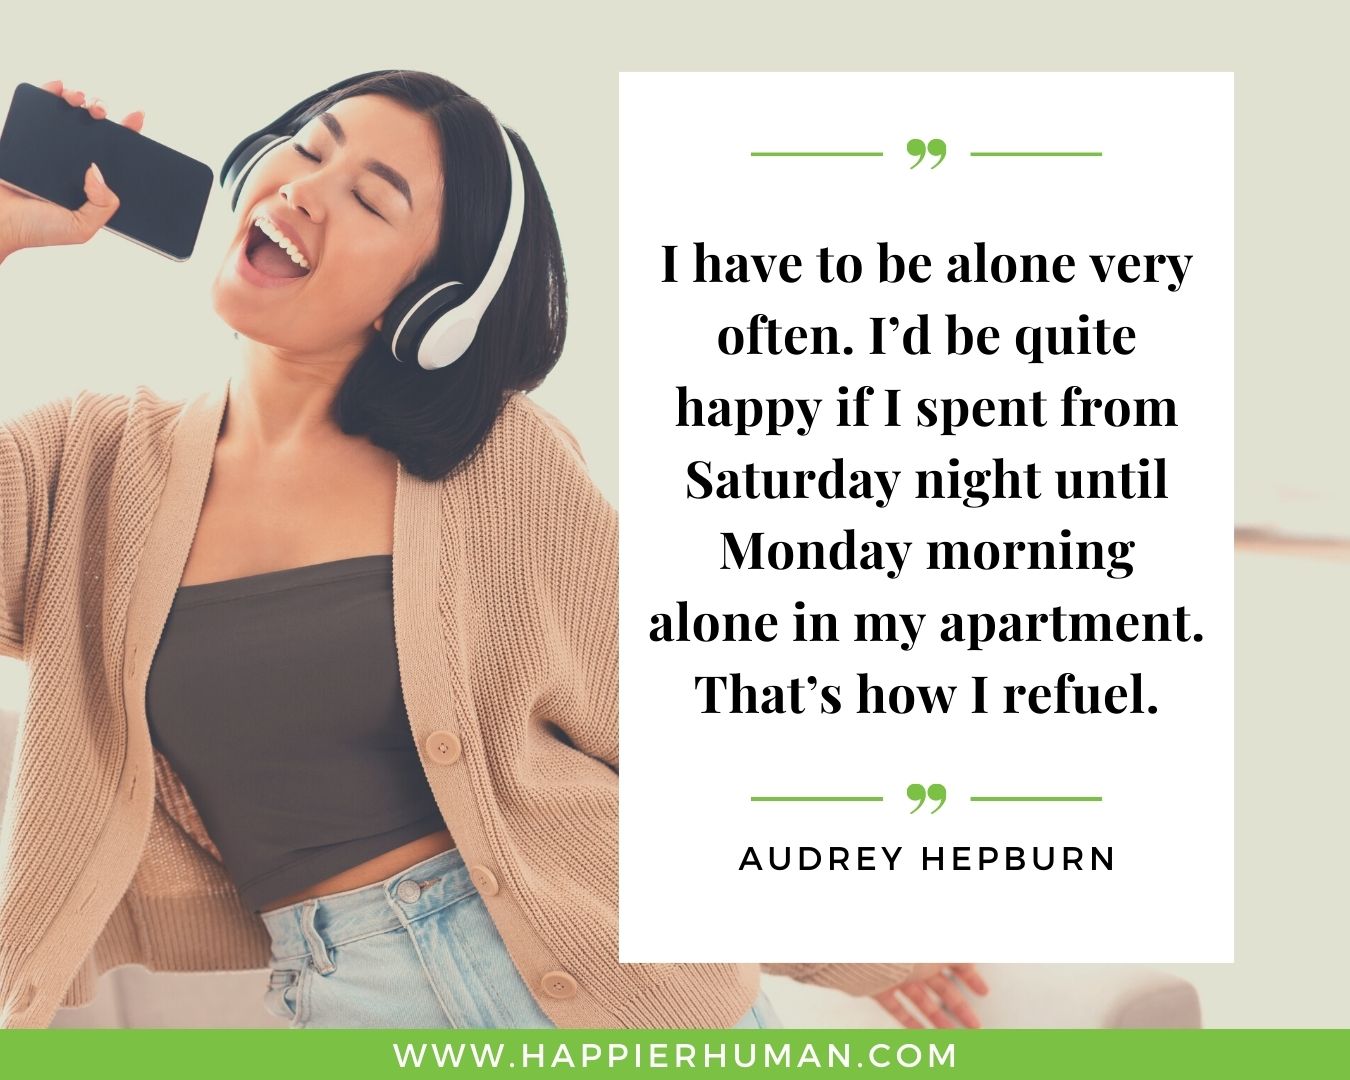 Introvert Quotes - “I have to be alone very often. I’d be quite happy if I spent from Saturday night until Monday morning alone in my apartment. That’s how I refuel.” – Audrey Hepburn